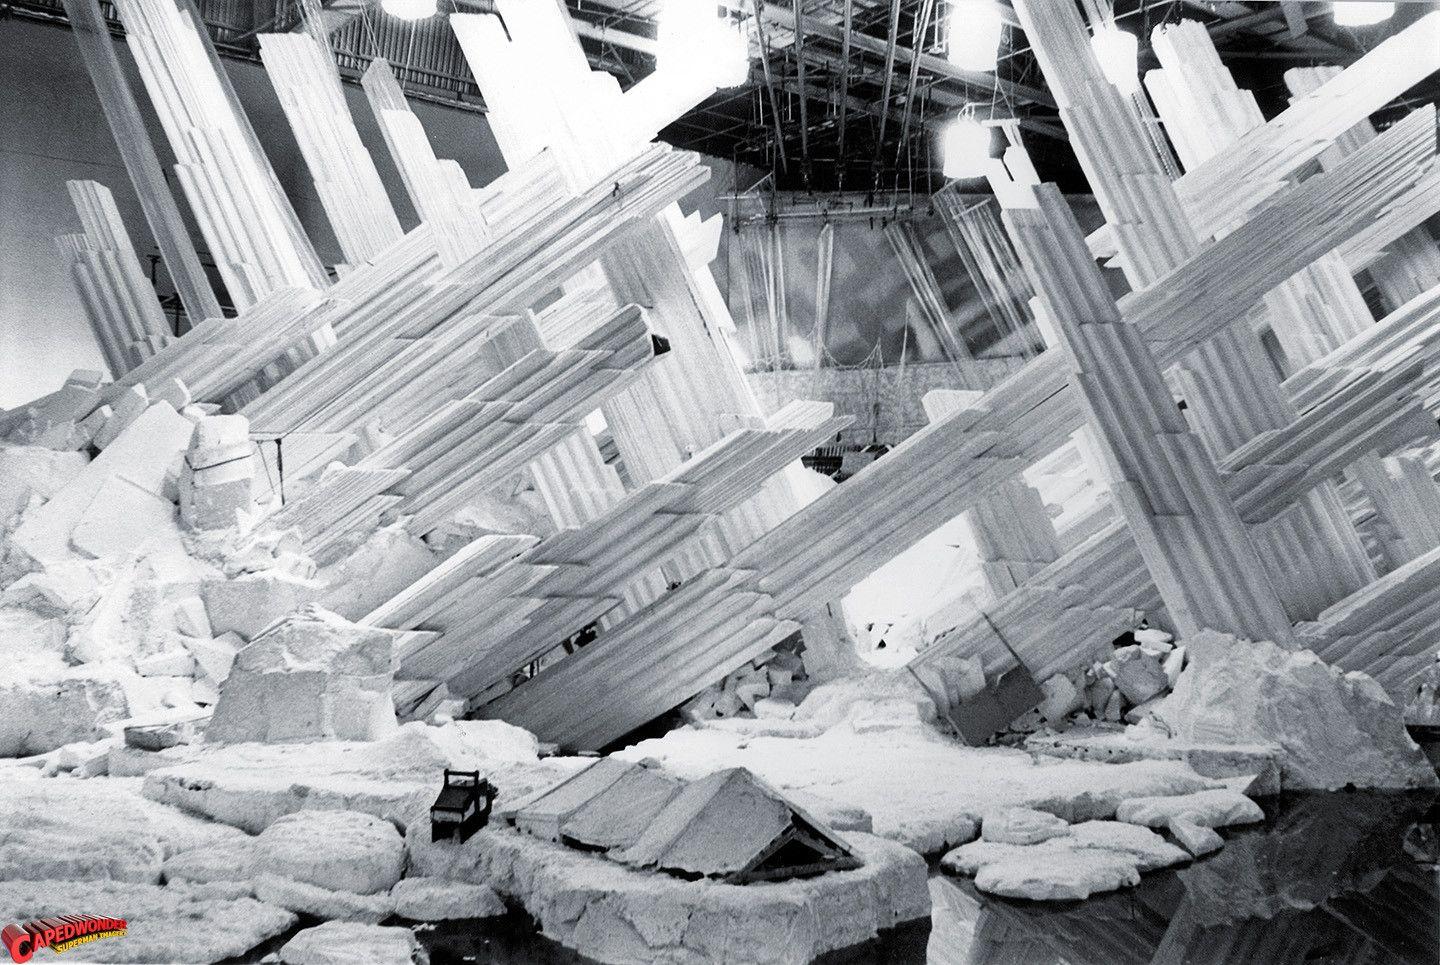 Fortress of Solitude (The Movie) Photo